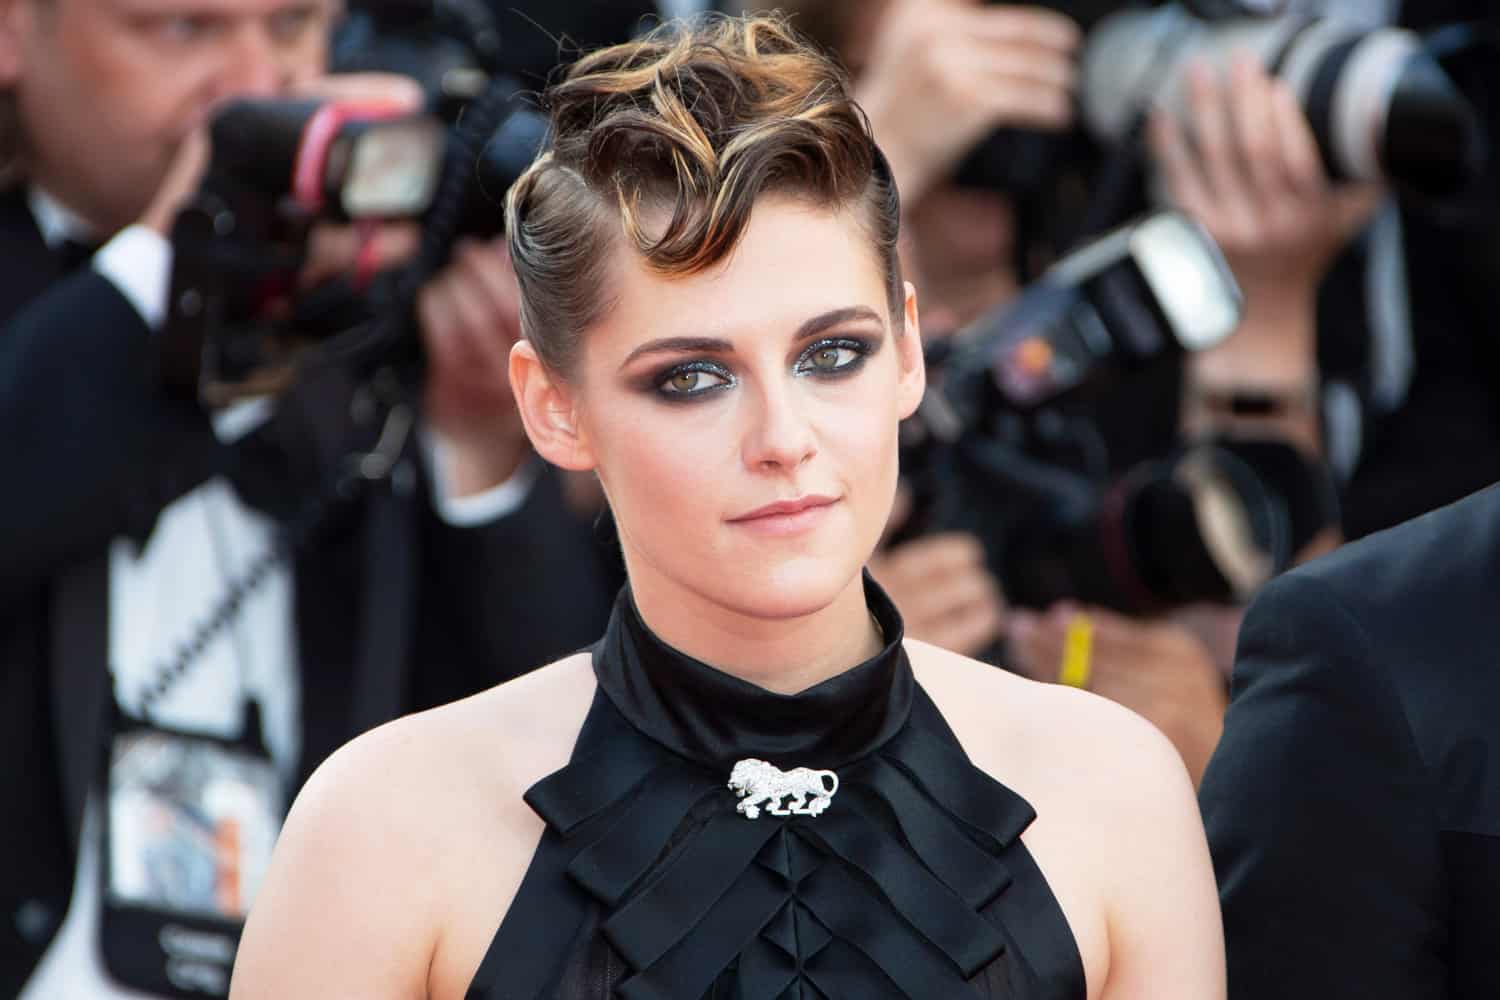 Kristen Stewart Opens Up About Her Relationship With Karl Lagerfeld